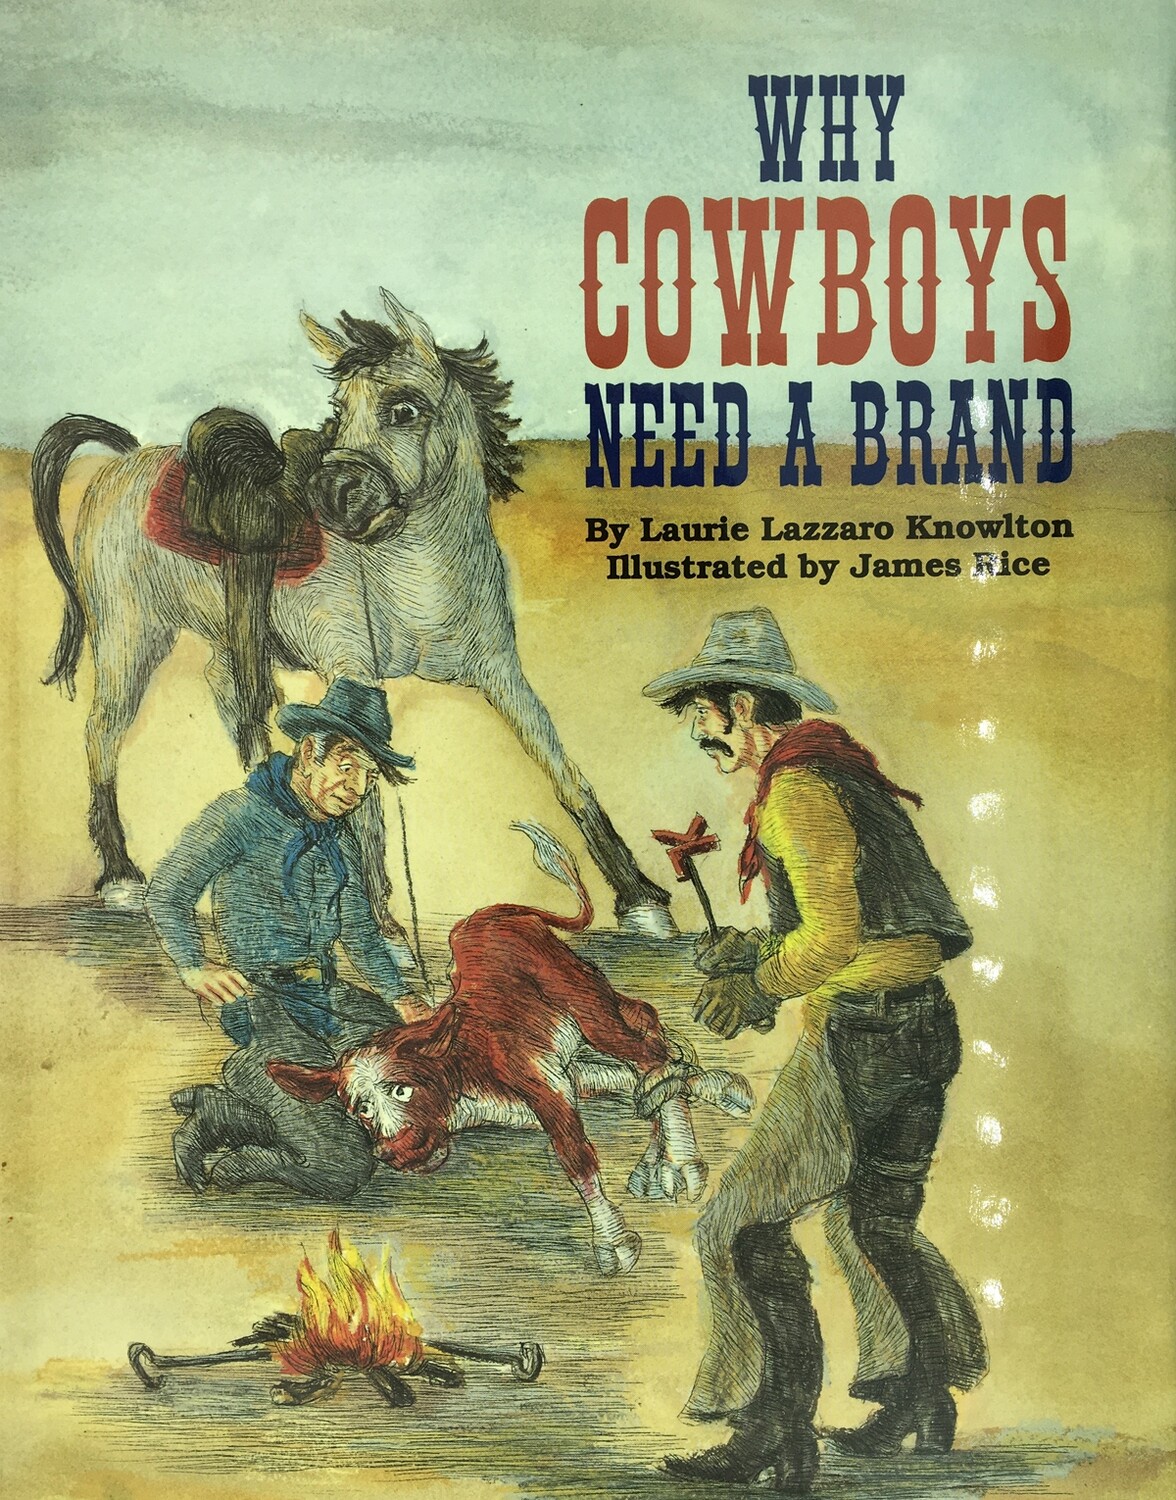 Why Cowboys Need A Brand